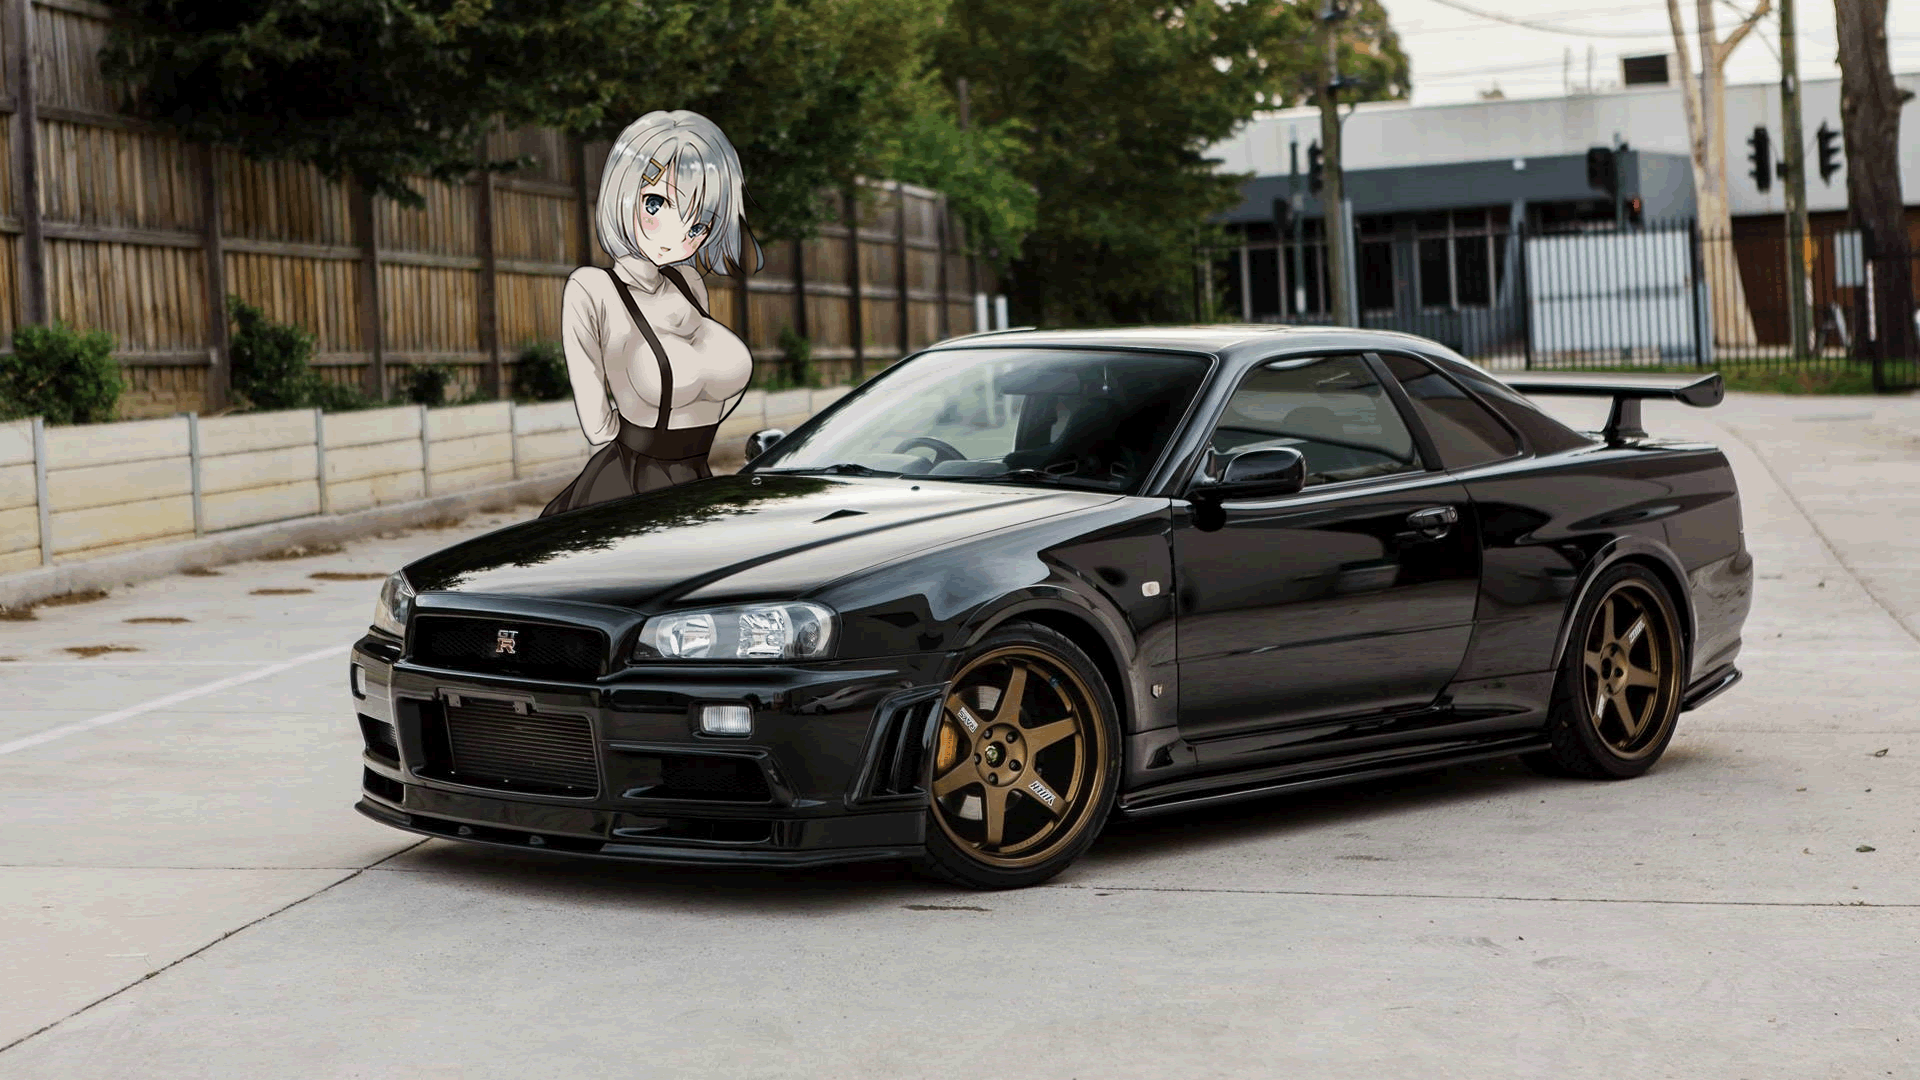 Skyline R34 Anime Girls JDM Car Picture In Picture 1920x1080